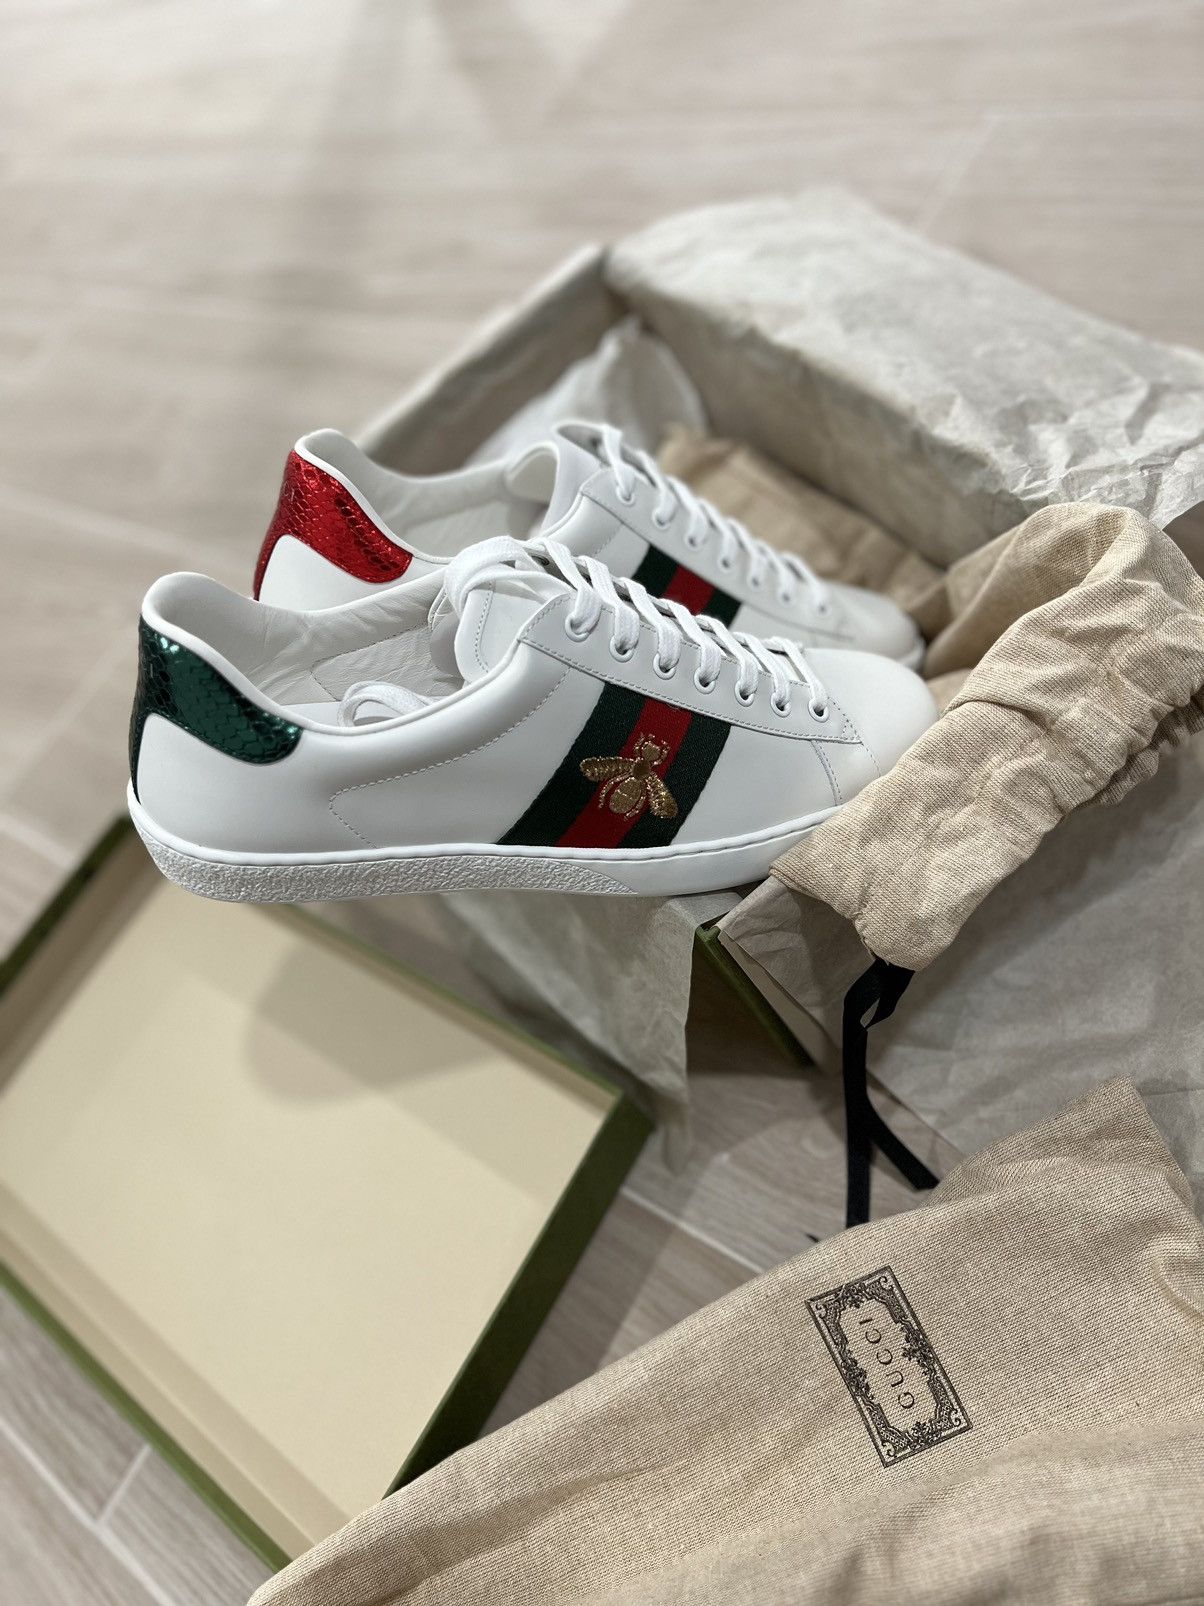 Gucci Ace Sneakers Men Size 9-G (9.5 US)